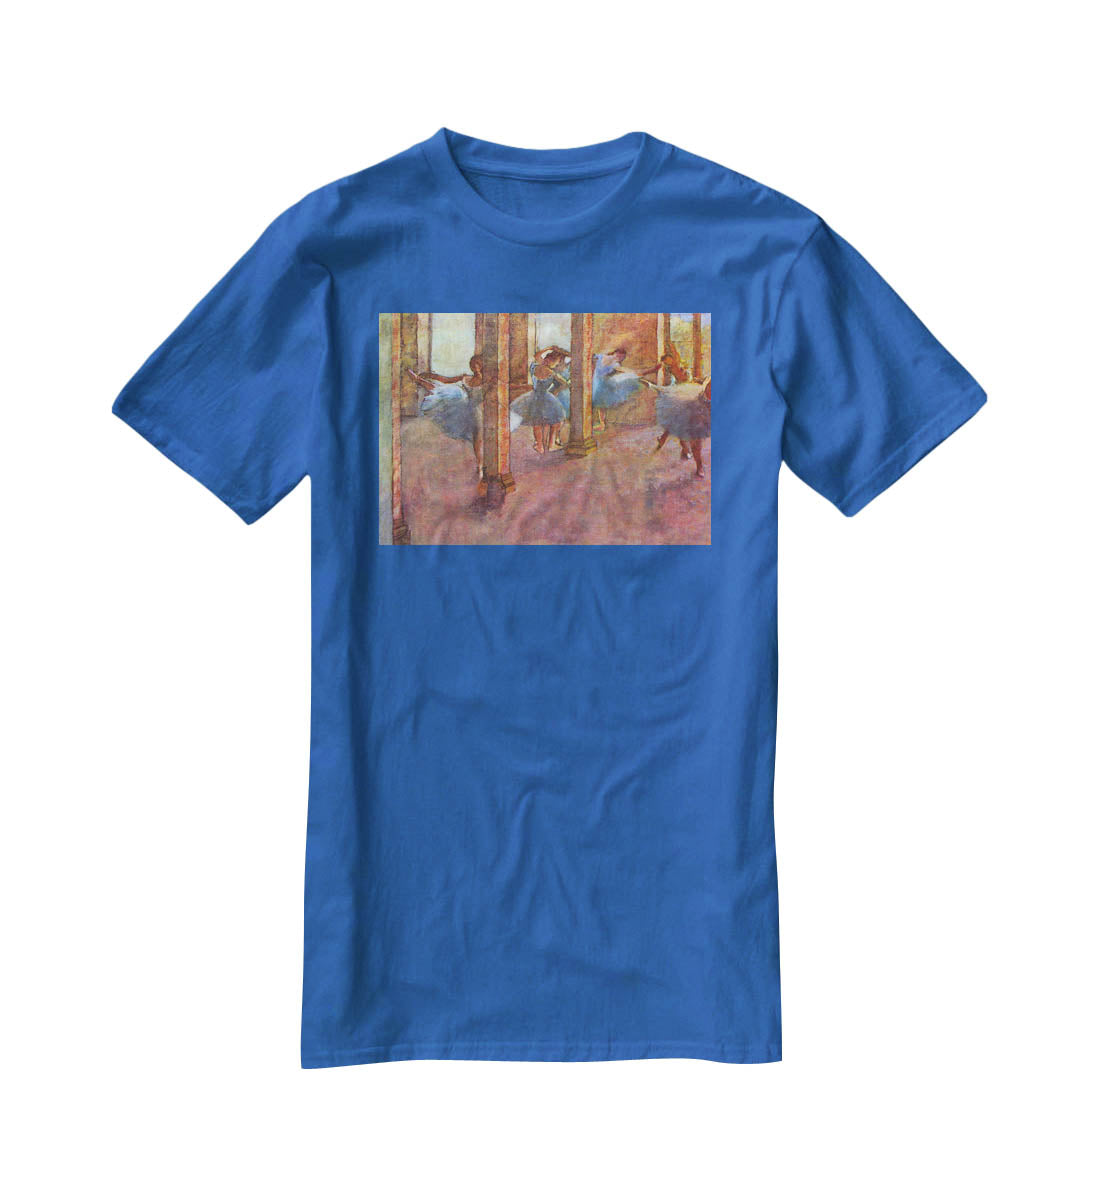 Dancers in the Foyer by Degas T-Shirt - Canvas Art Rocks - 2